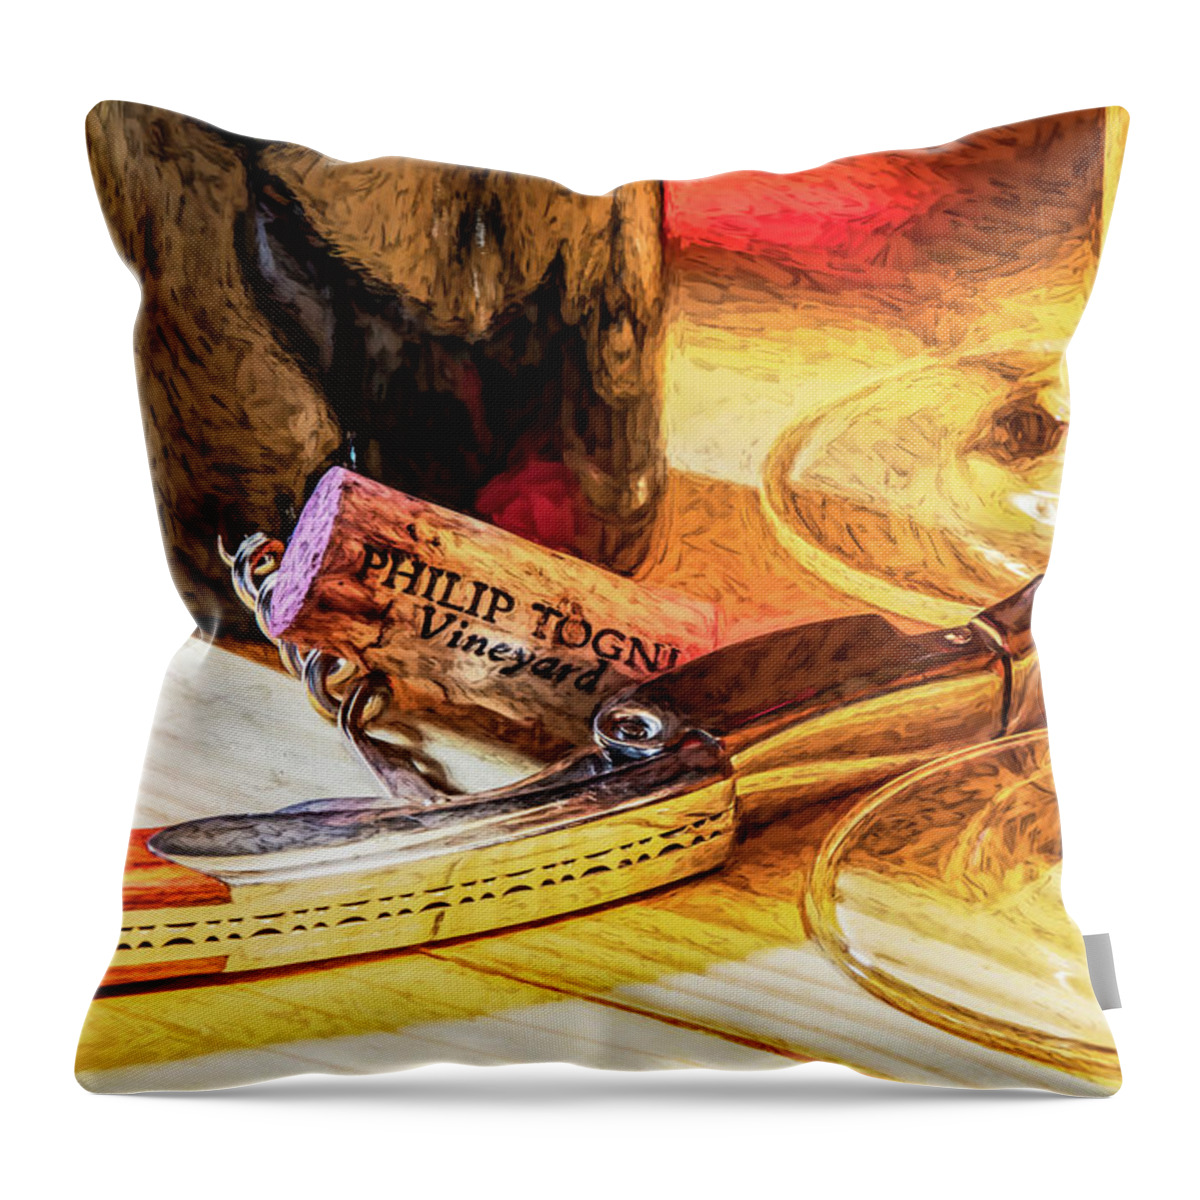 Cabernet Sauvignon Throw Pillow featuring the photograph My Friend Togni by David Letts